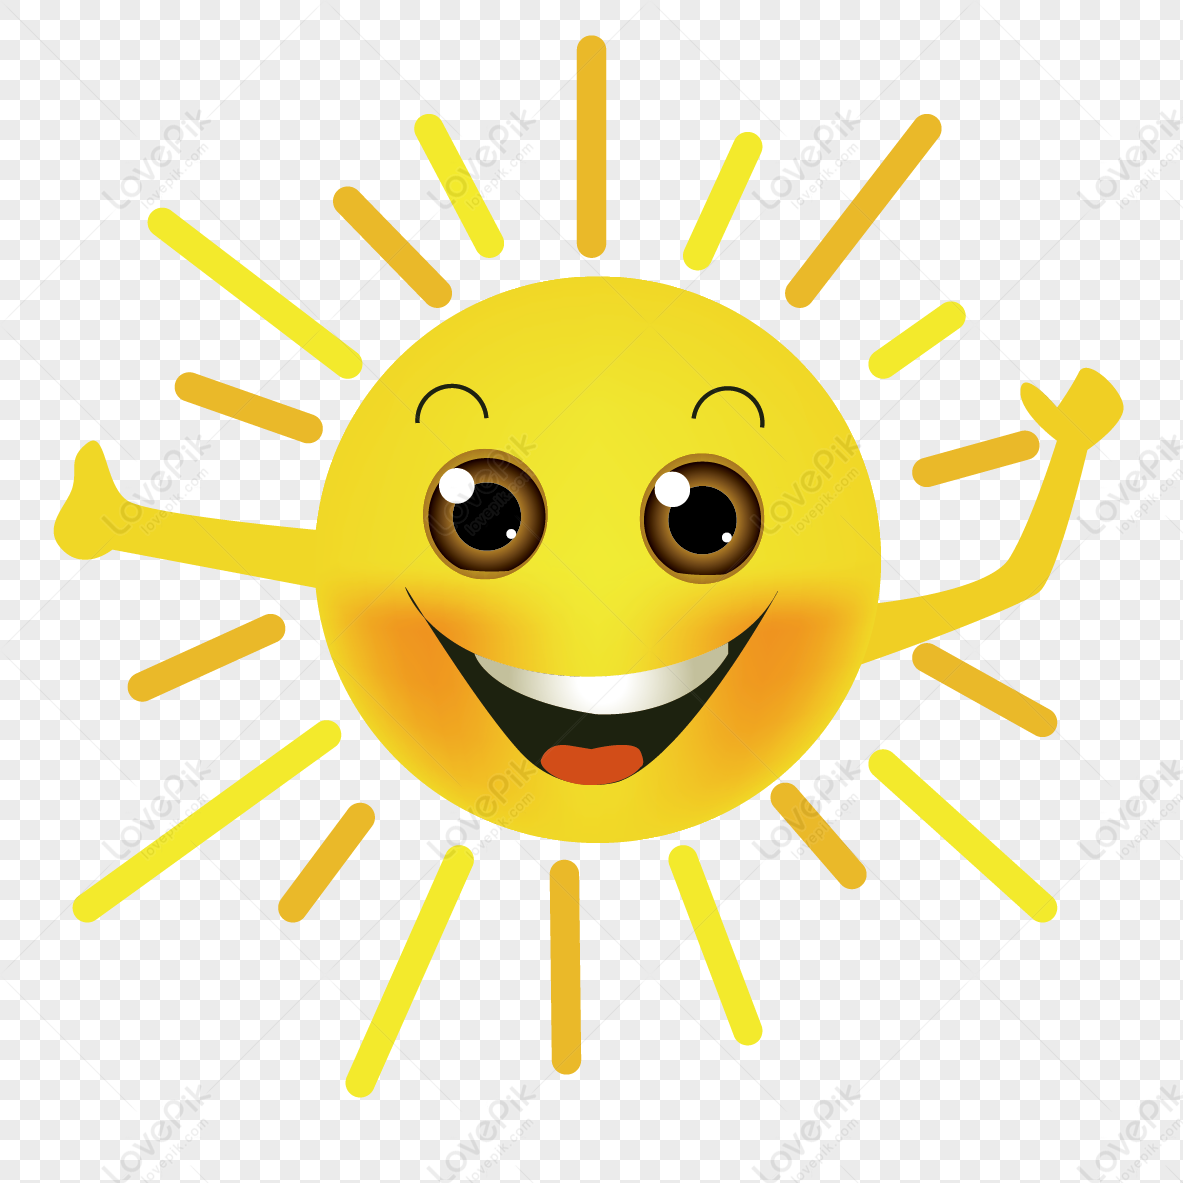 Sun Cartoon PNG Image And Clipart Image For Free Download - Lovepik |  401535728